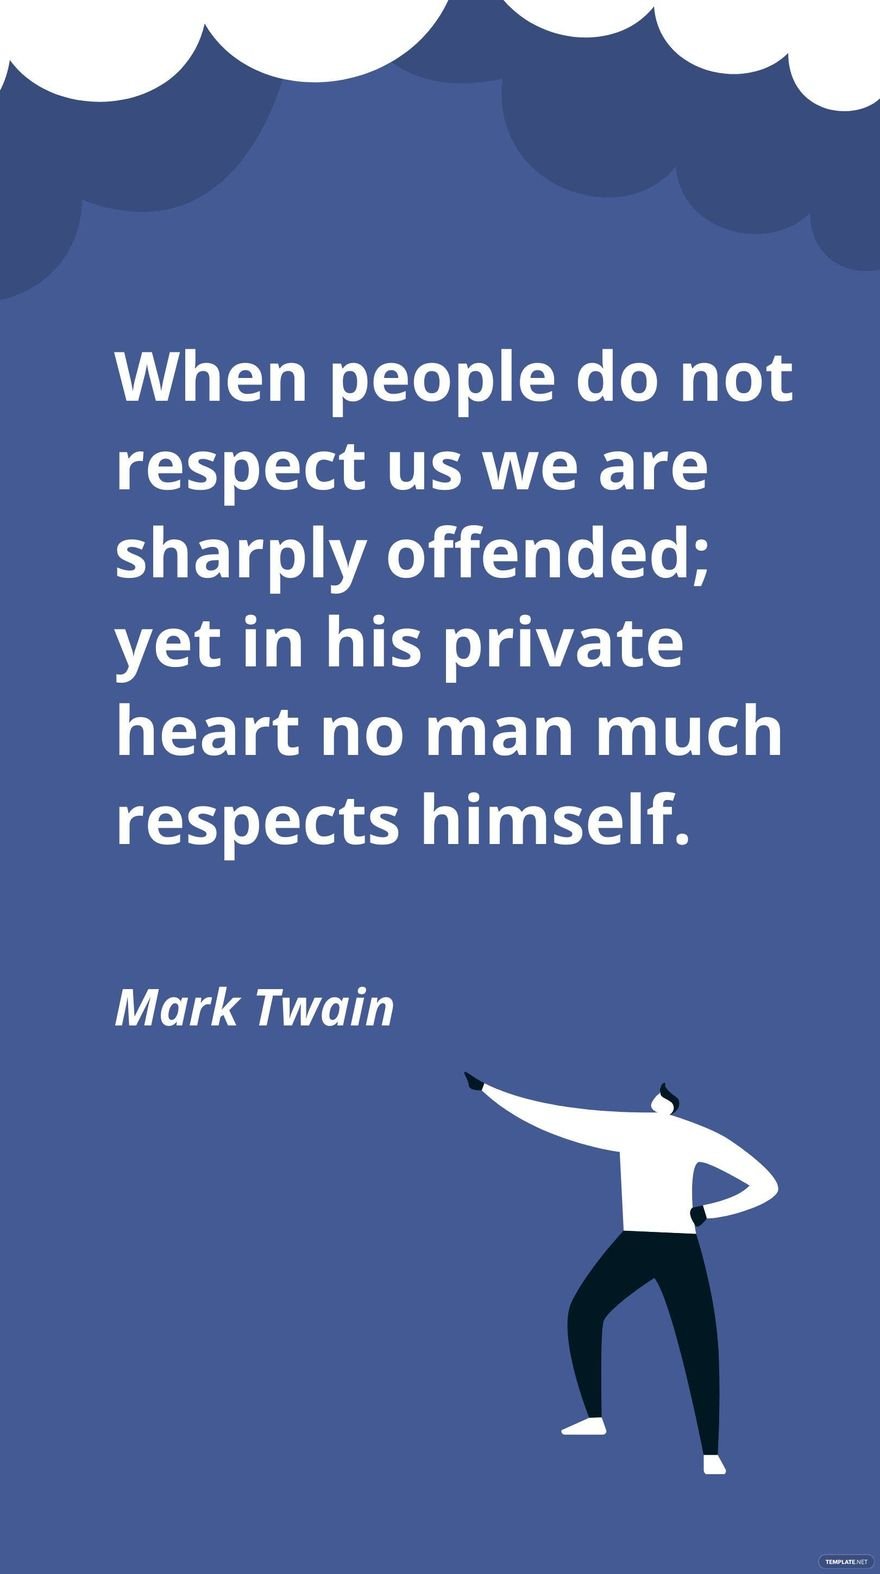 Free Mark Twain - When people do not respect us we are sharply offended; yet in his private heart no man much respects himself. in JPG